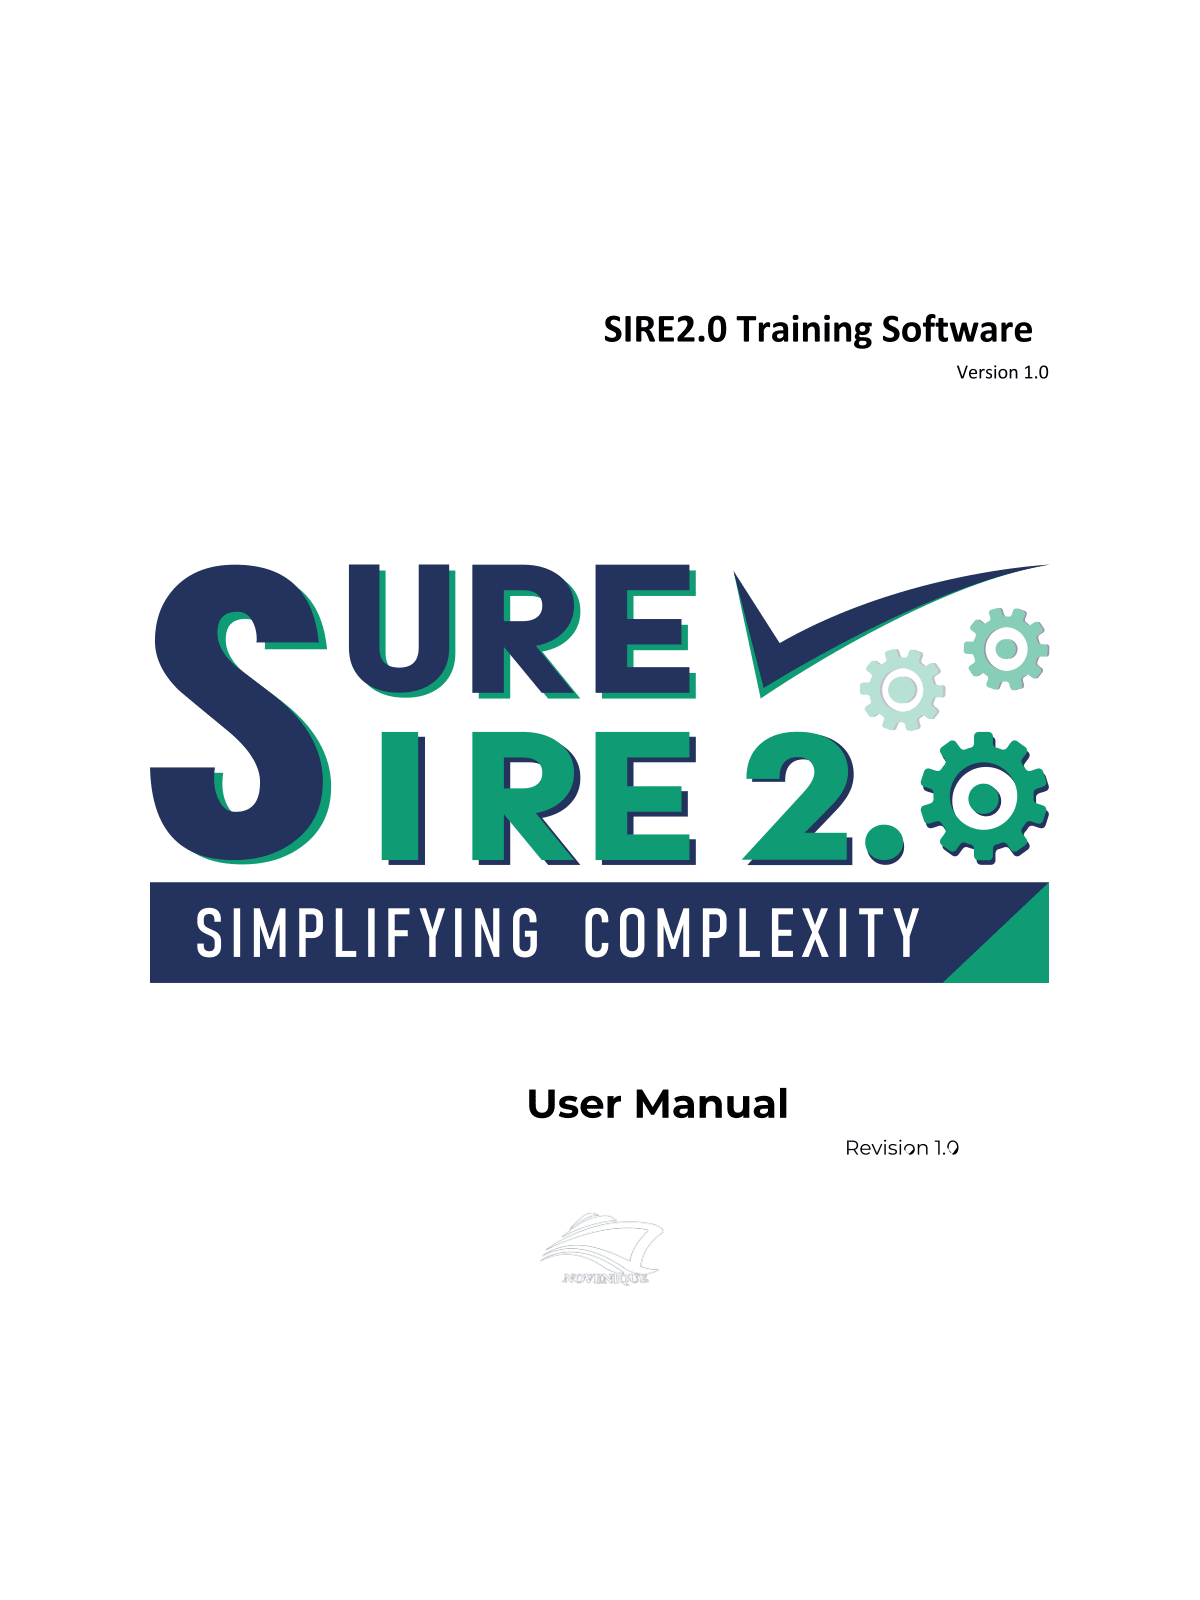 Cover of SureSIRE 2.0 user manual